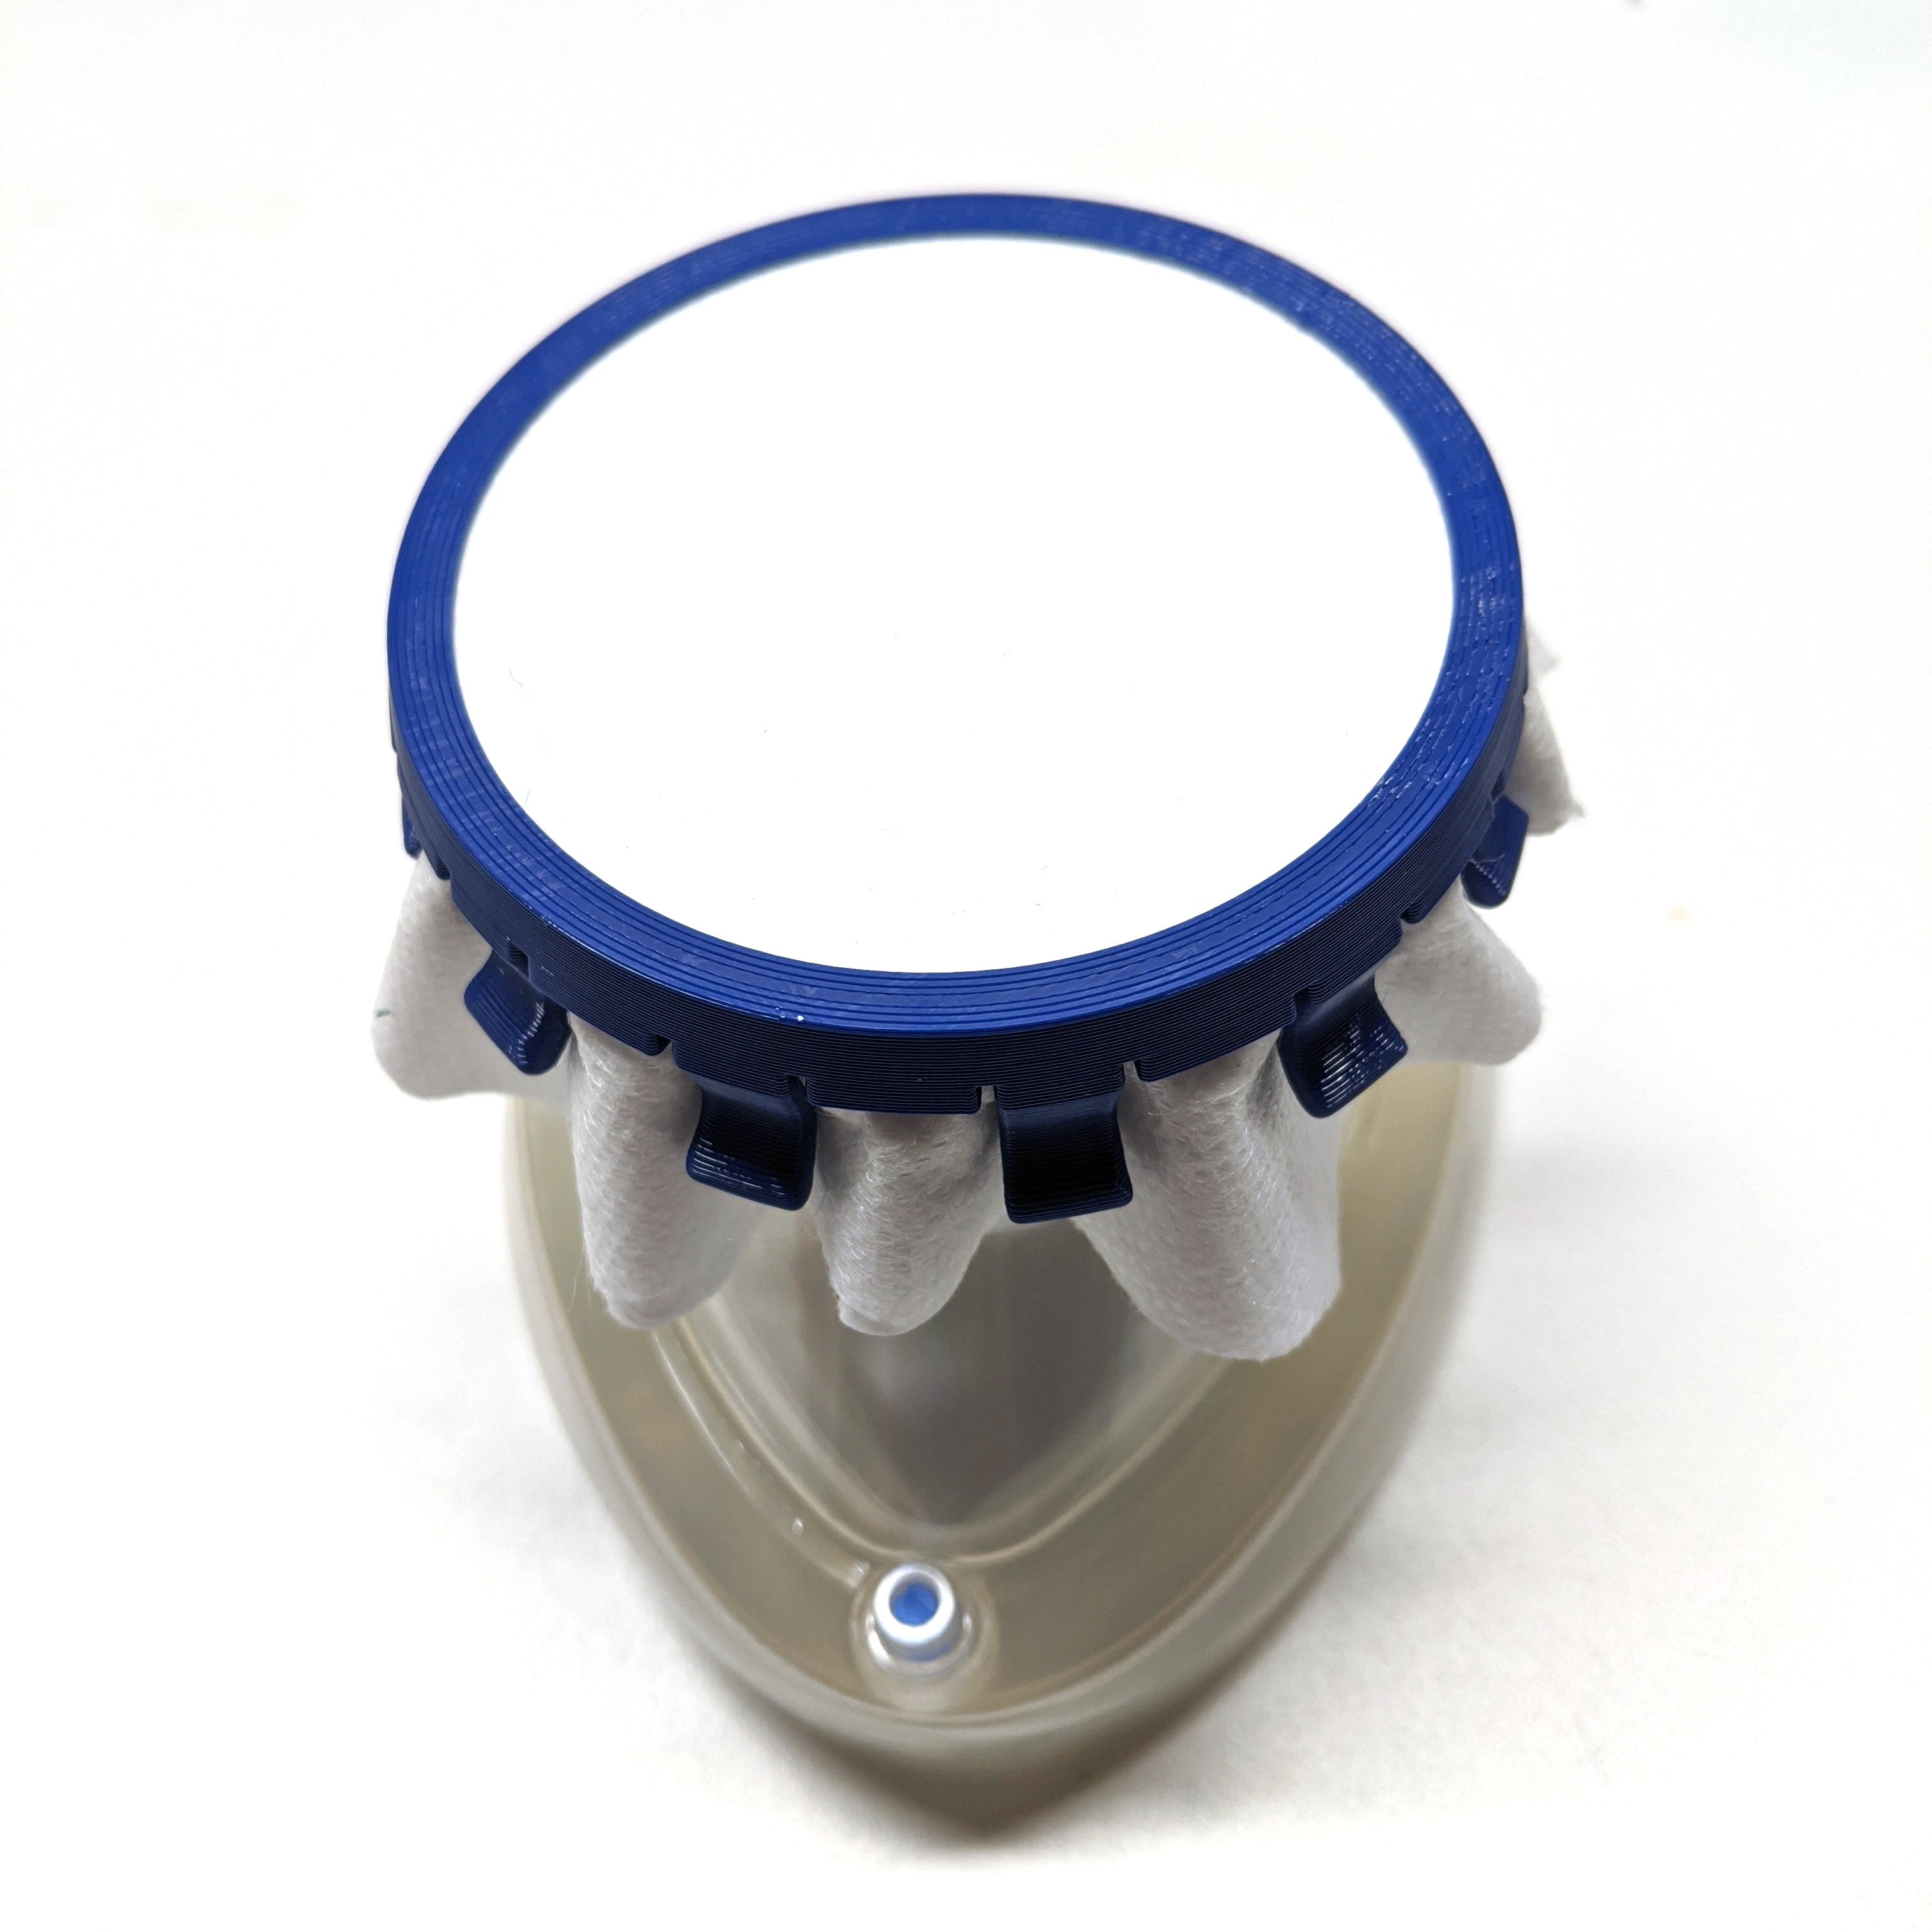 Anesthesia mask adapter for alternatively sourced filter material